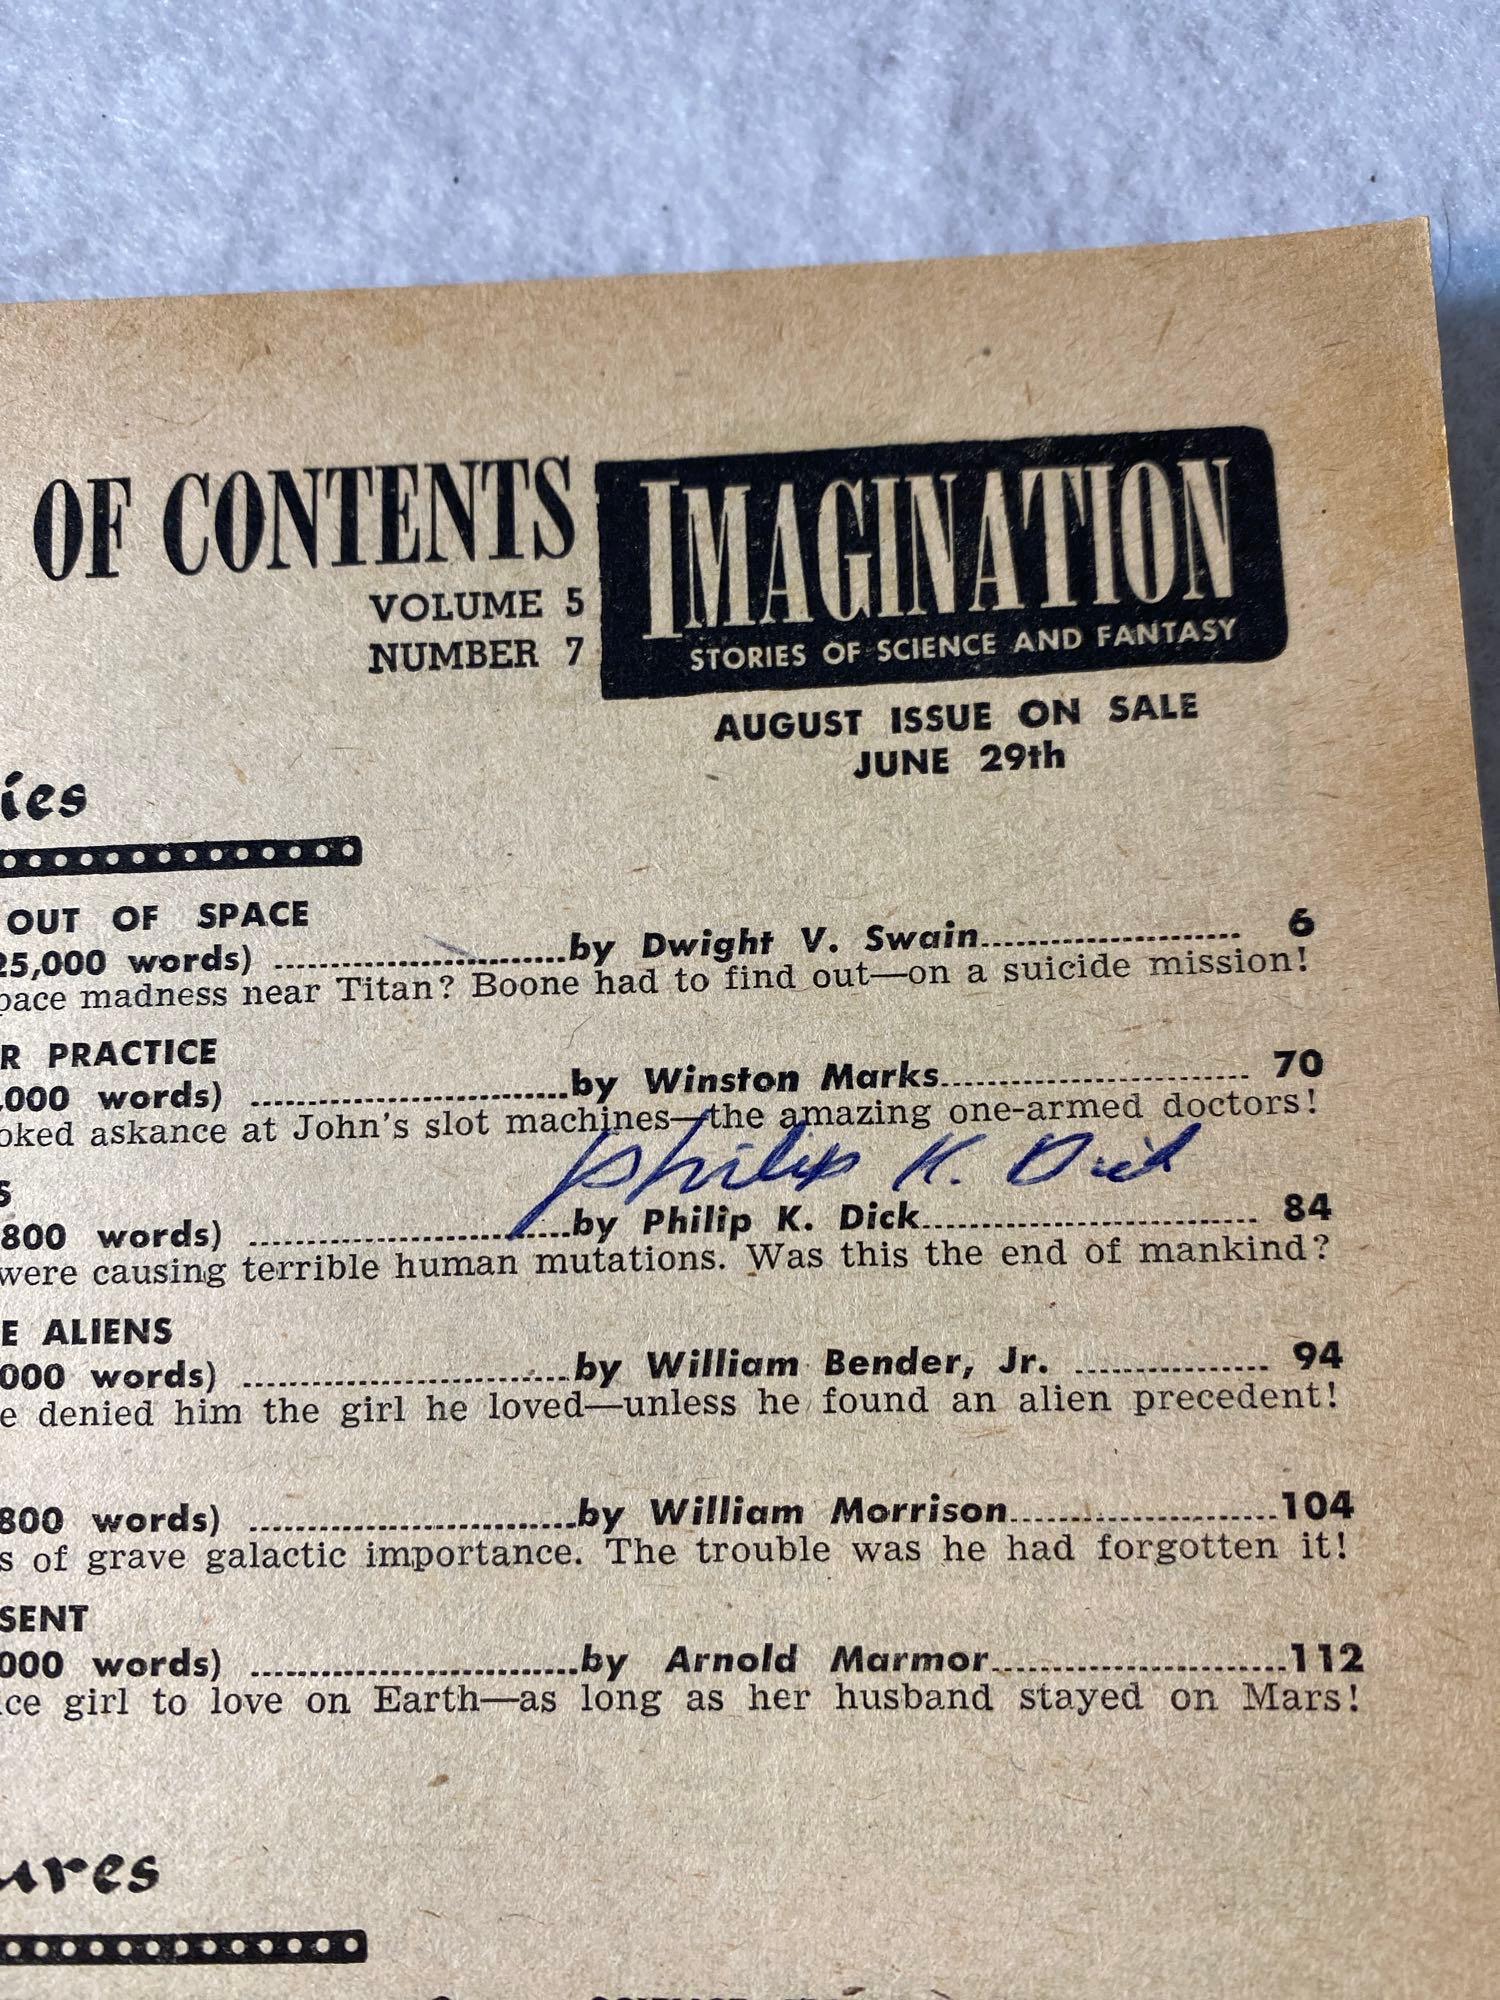 1954 Imagination Stories Signed By Philip K. Dick With 1st Publication The Crack In Space